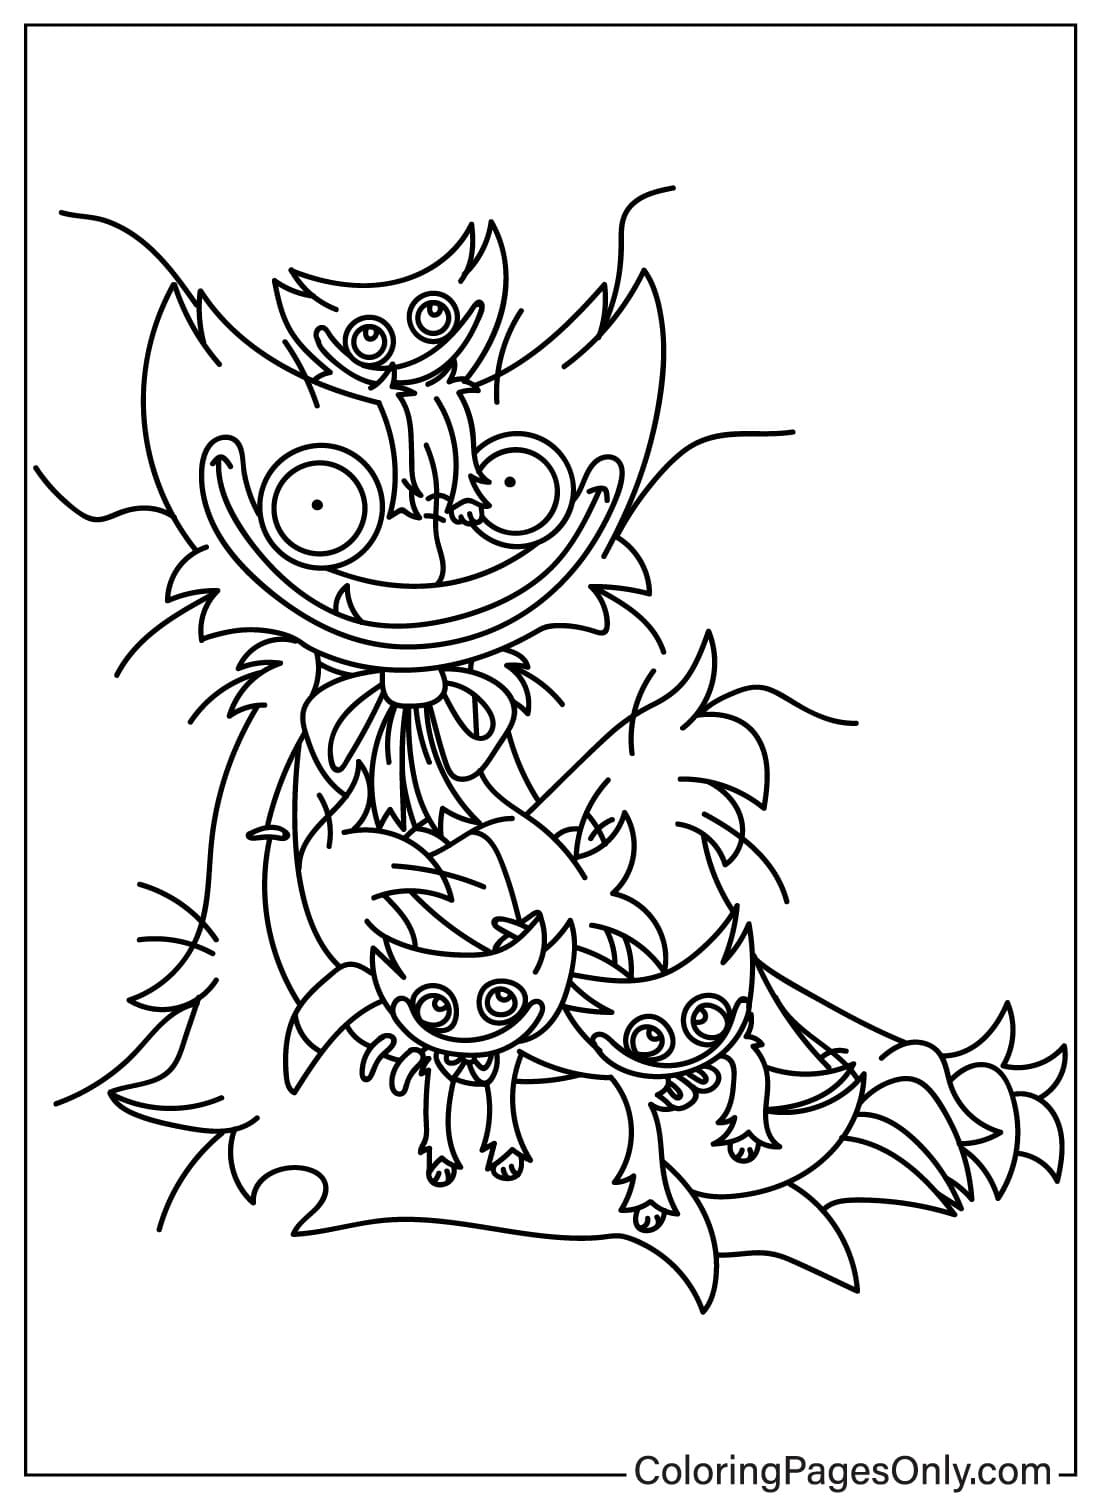 Huggy Wuggy Coloring Page Printable from Huggy Wuggy